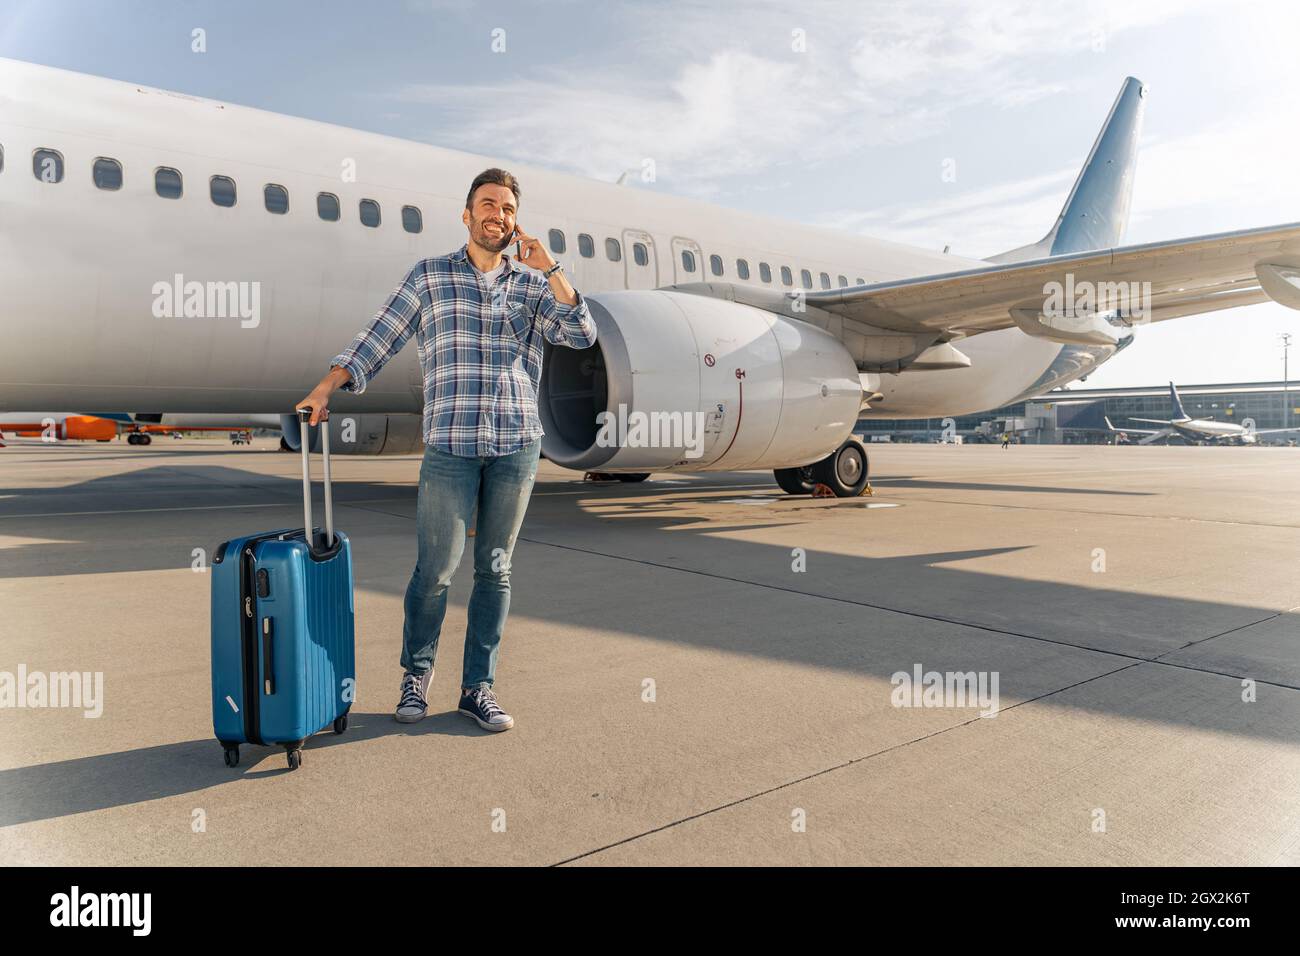 Smiling man using smartphone near airplane outdoor Stock Photo